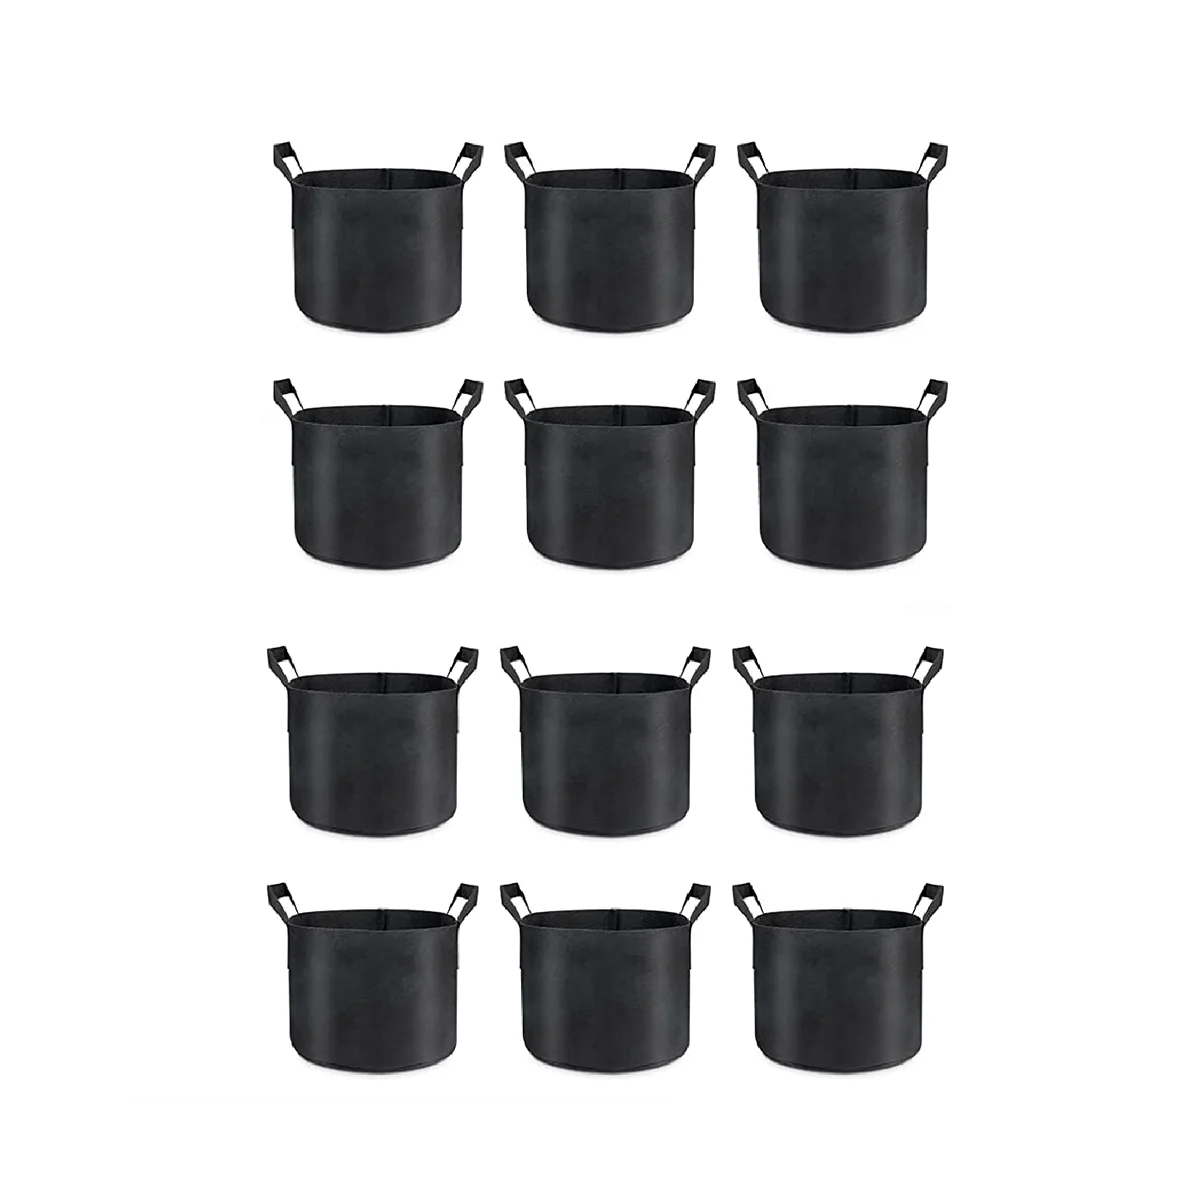 

12-Pack Grow Bags 5 Gallon, Thick Fabric Planter Bags for Vegetables, Sturdy Handles & Reinforced Stitching